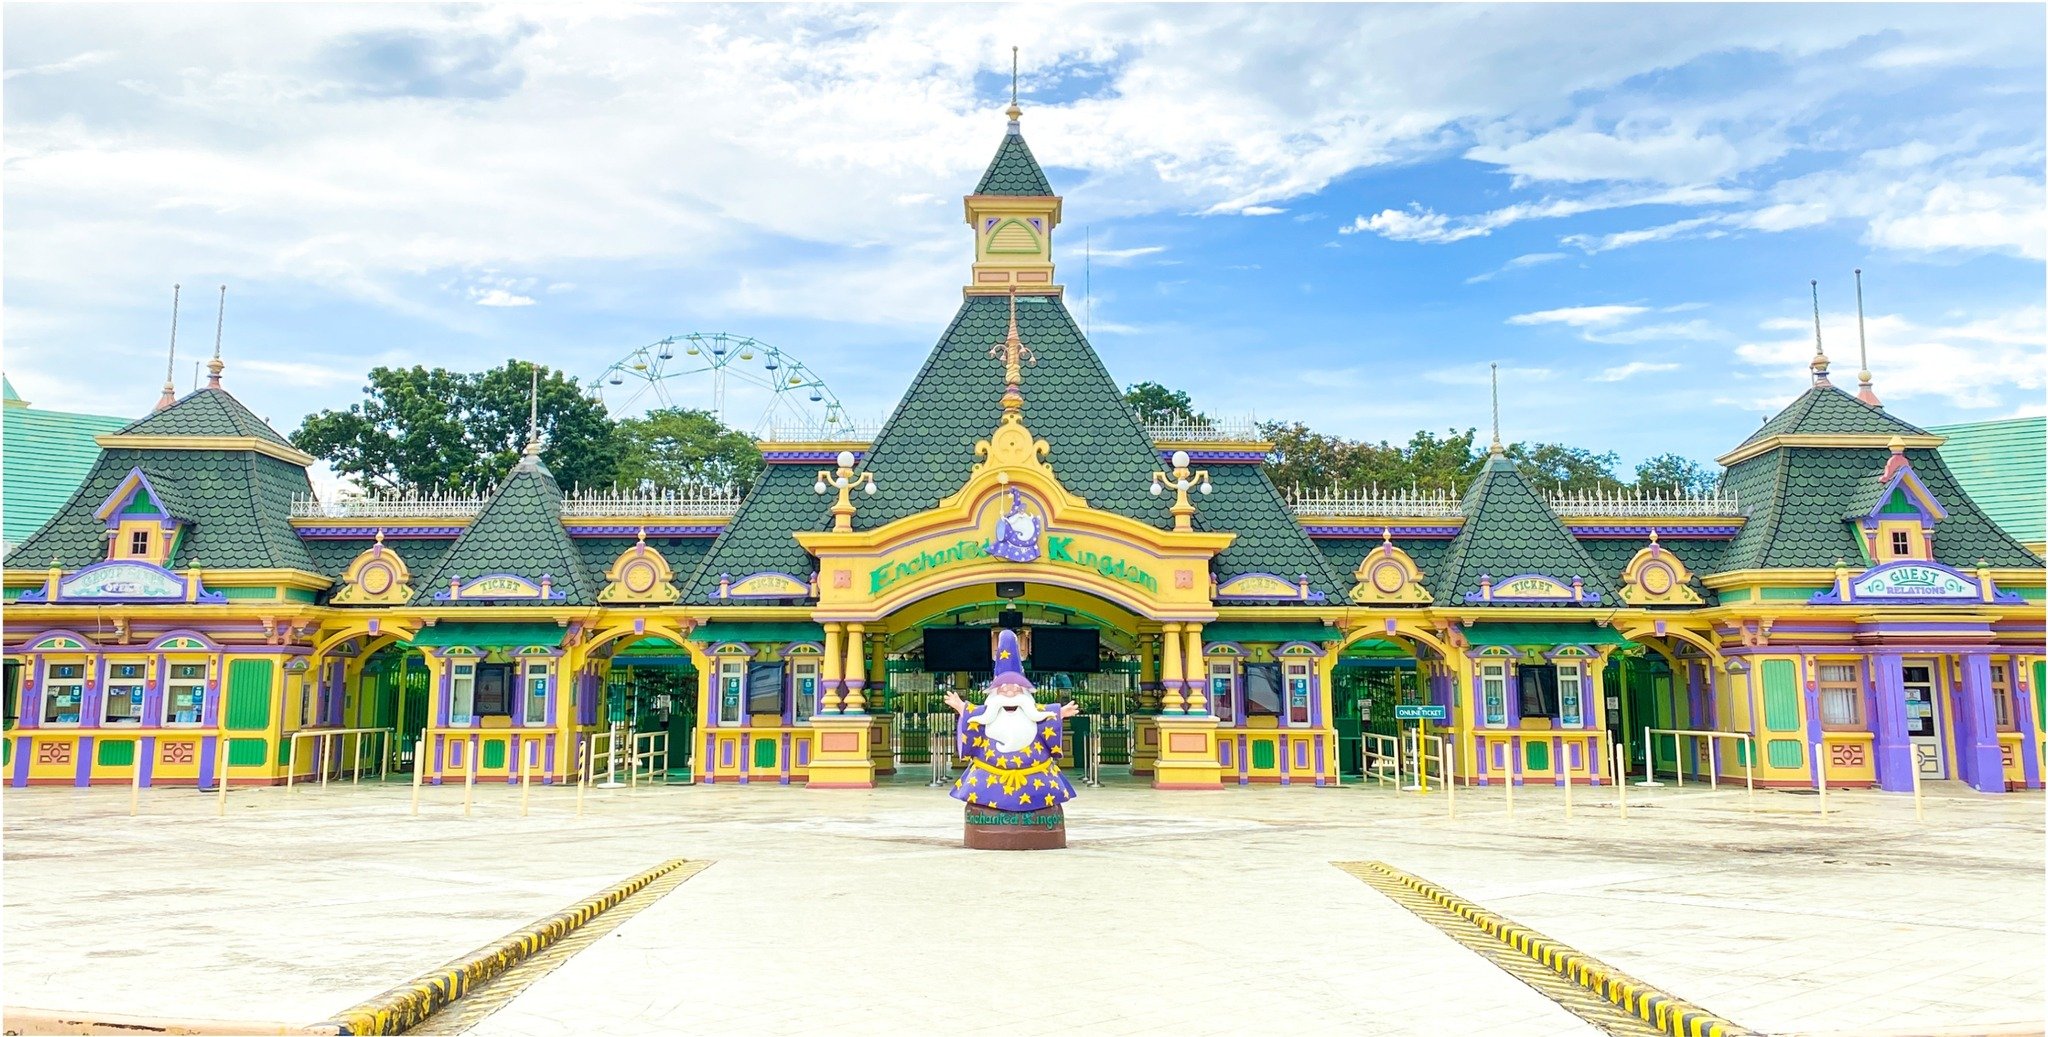 places to hang out with friends in manila - enchanted kingdom